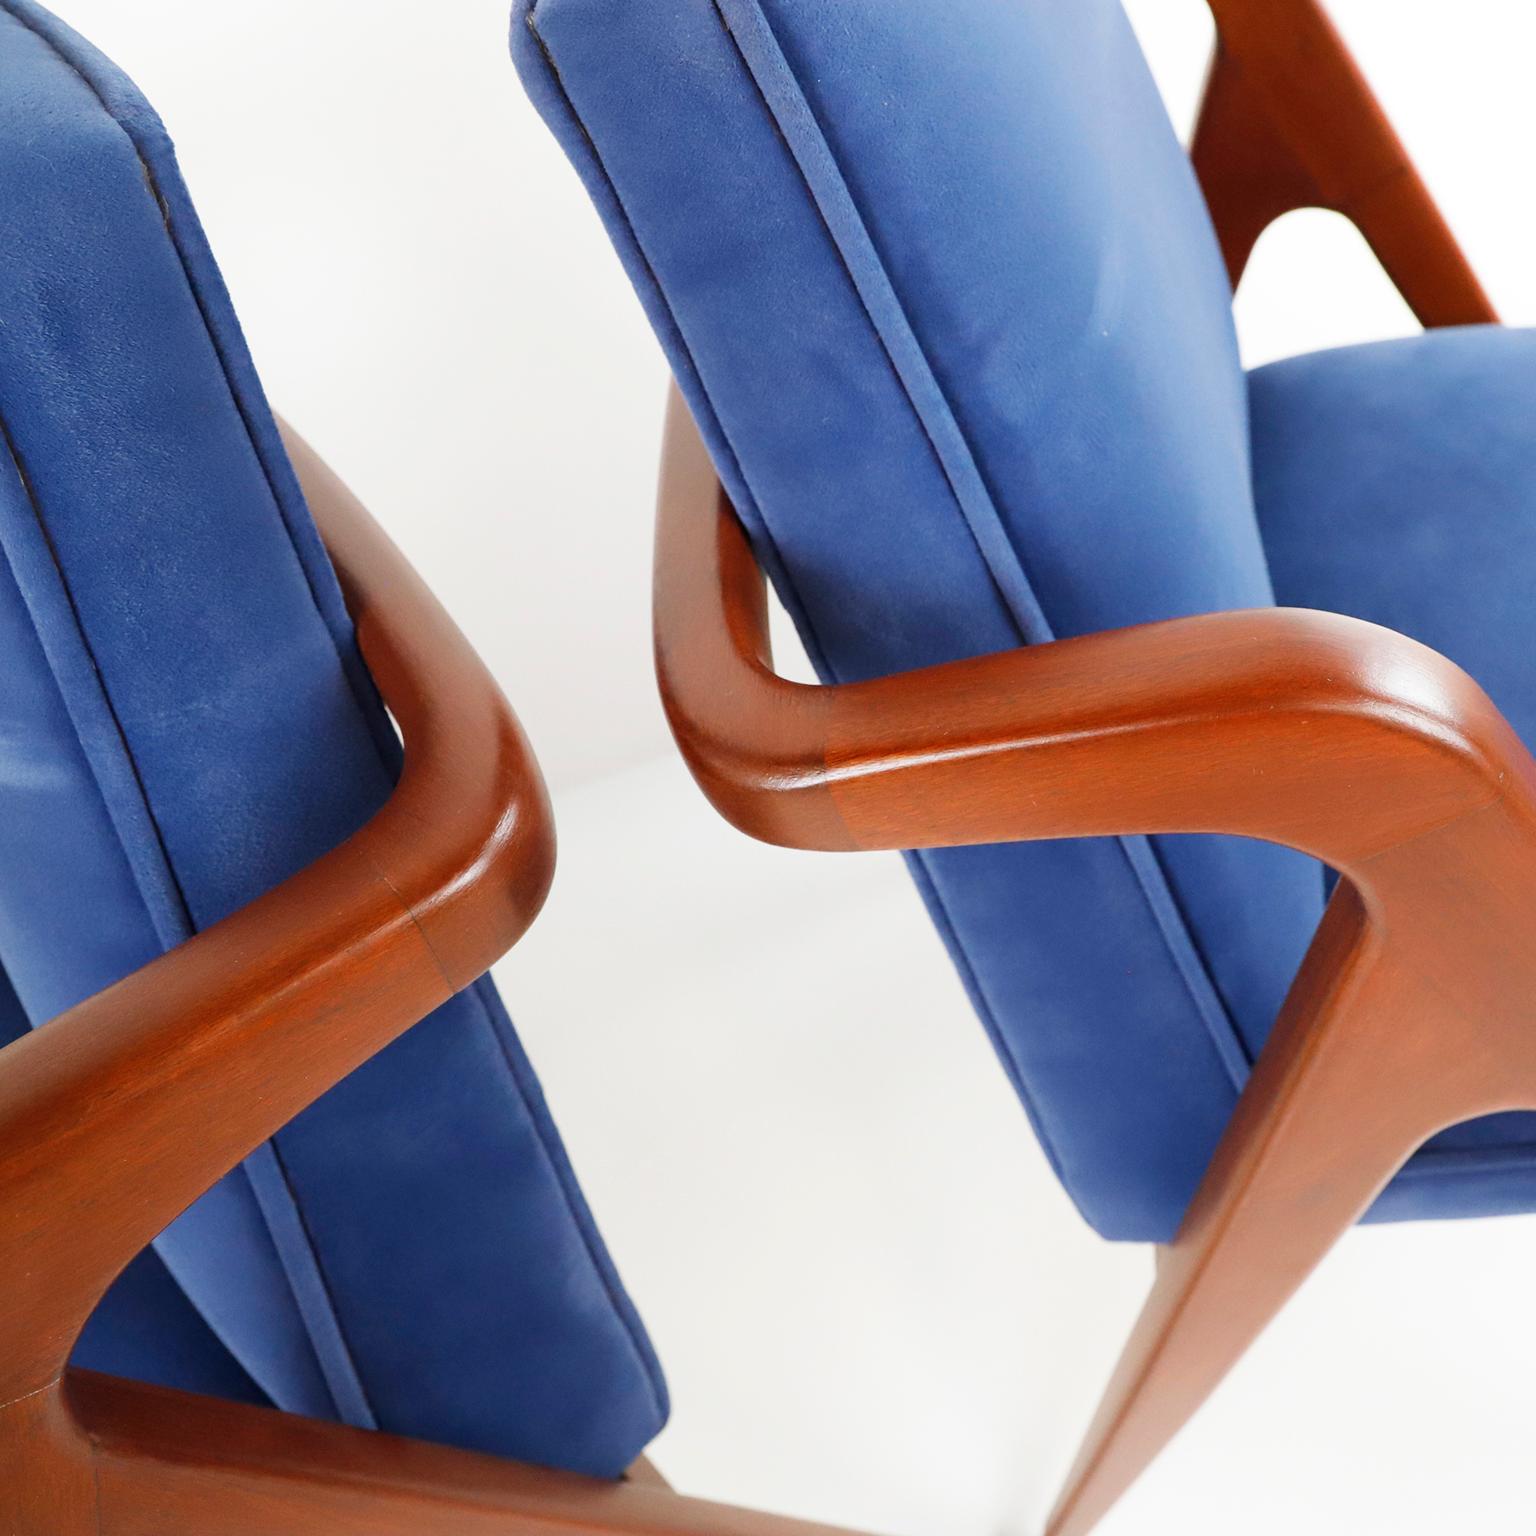 Mahogany Set of Original Midcentury Mexican Chairs Designed by Eugenio Escudero For Sale